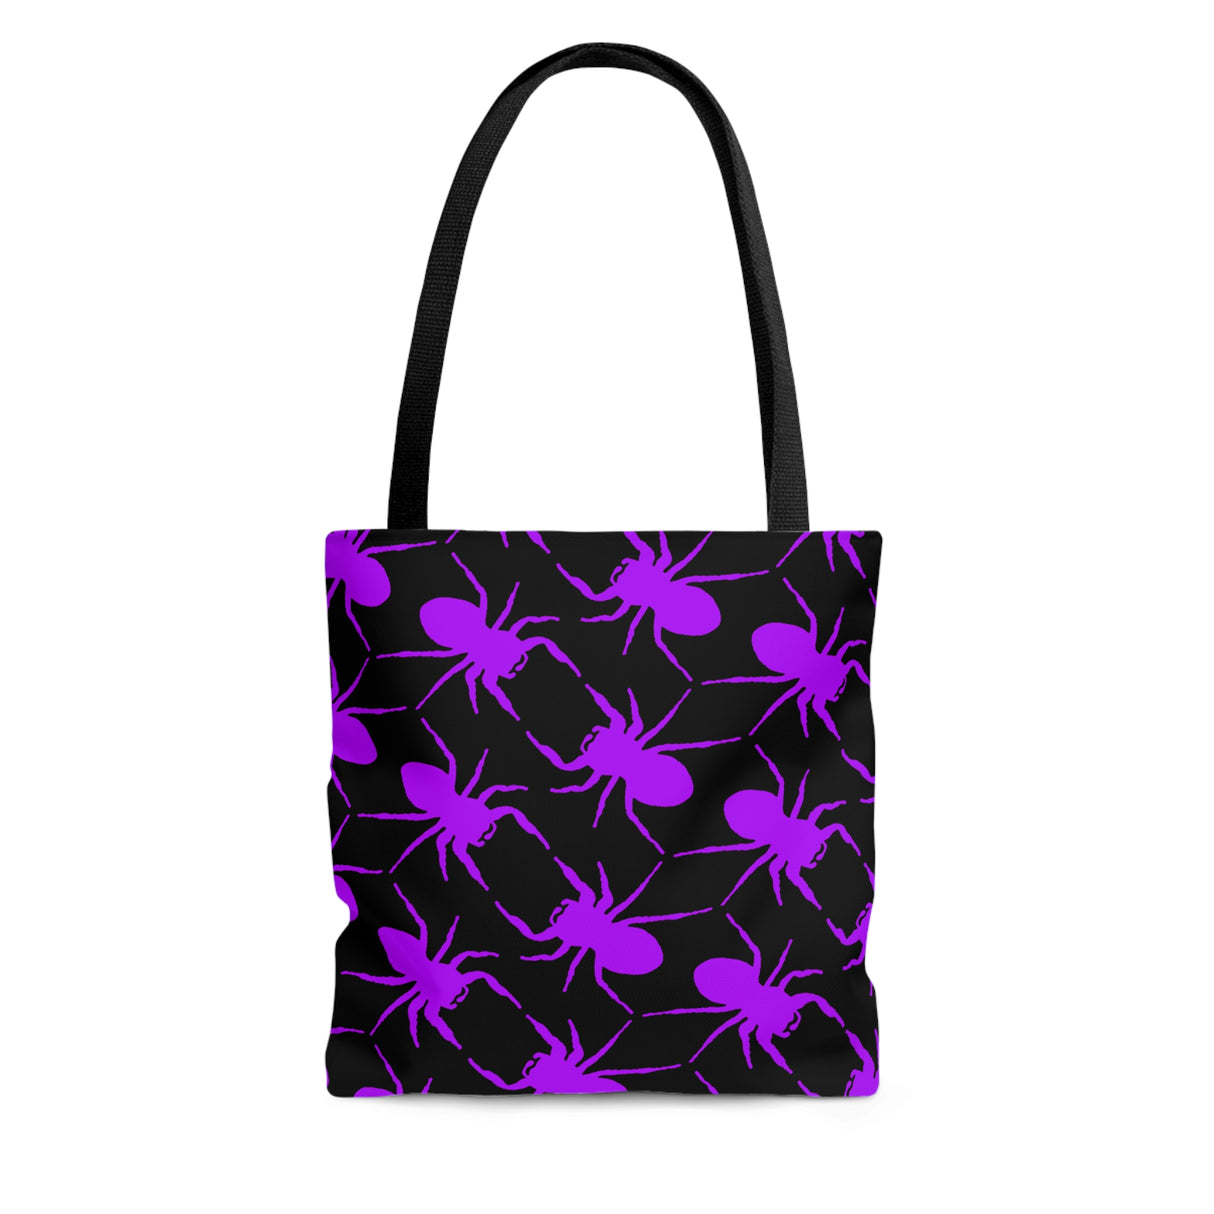 Jumping Spider Print Tote Bag with Purple on Black Spider Print